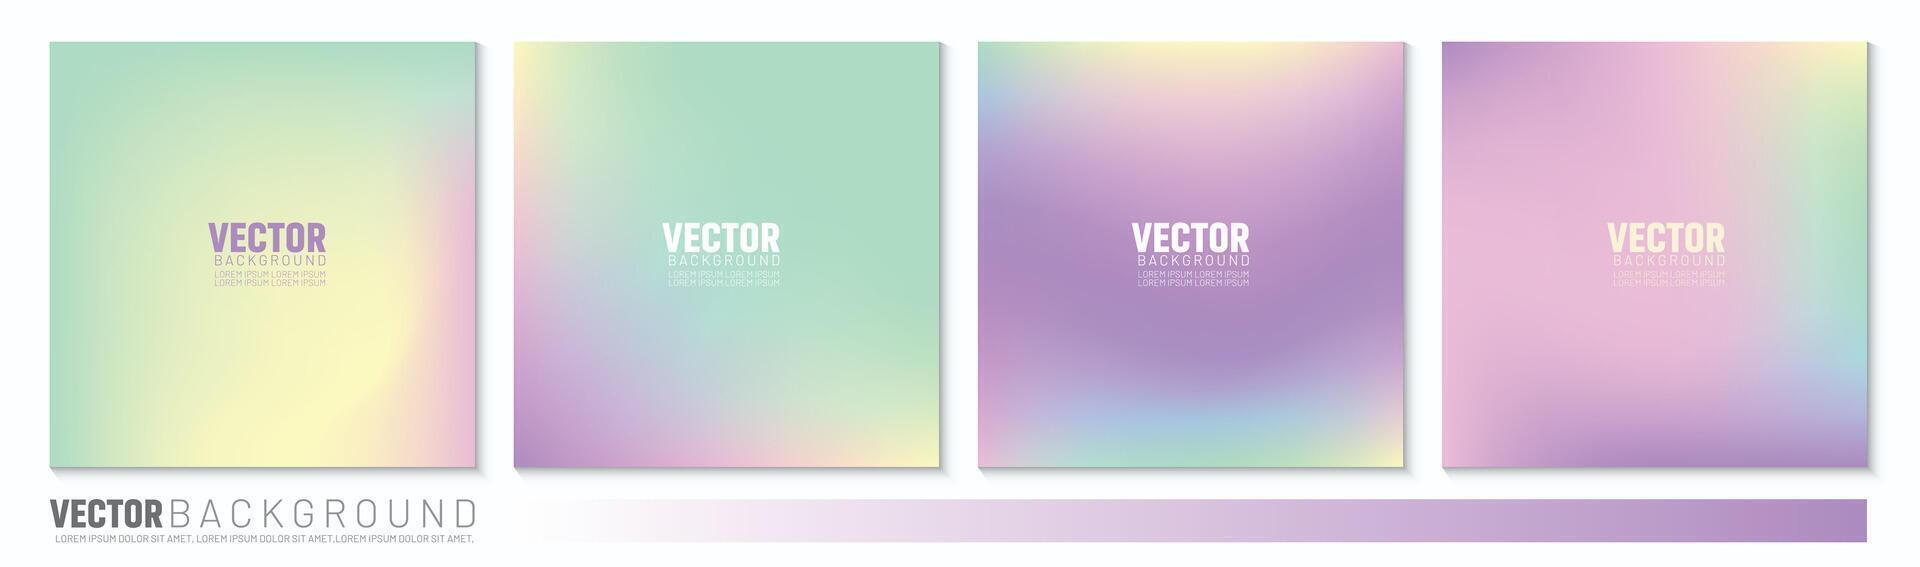 Soft Yellow, Mint, Pink, and Purple color gradient background. Social media post design vector